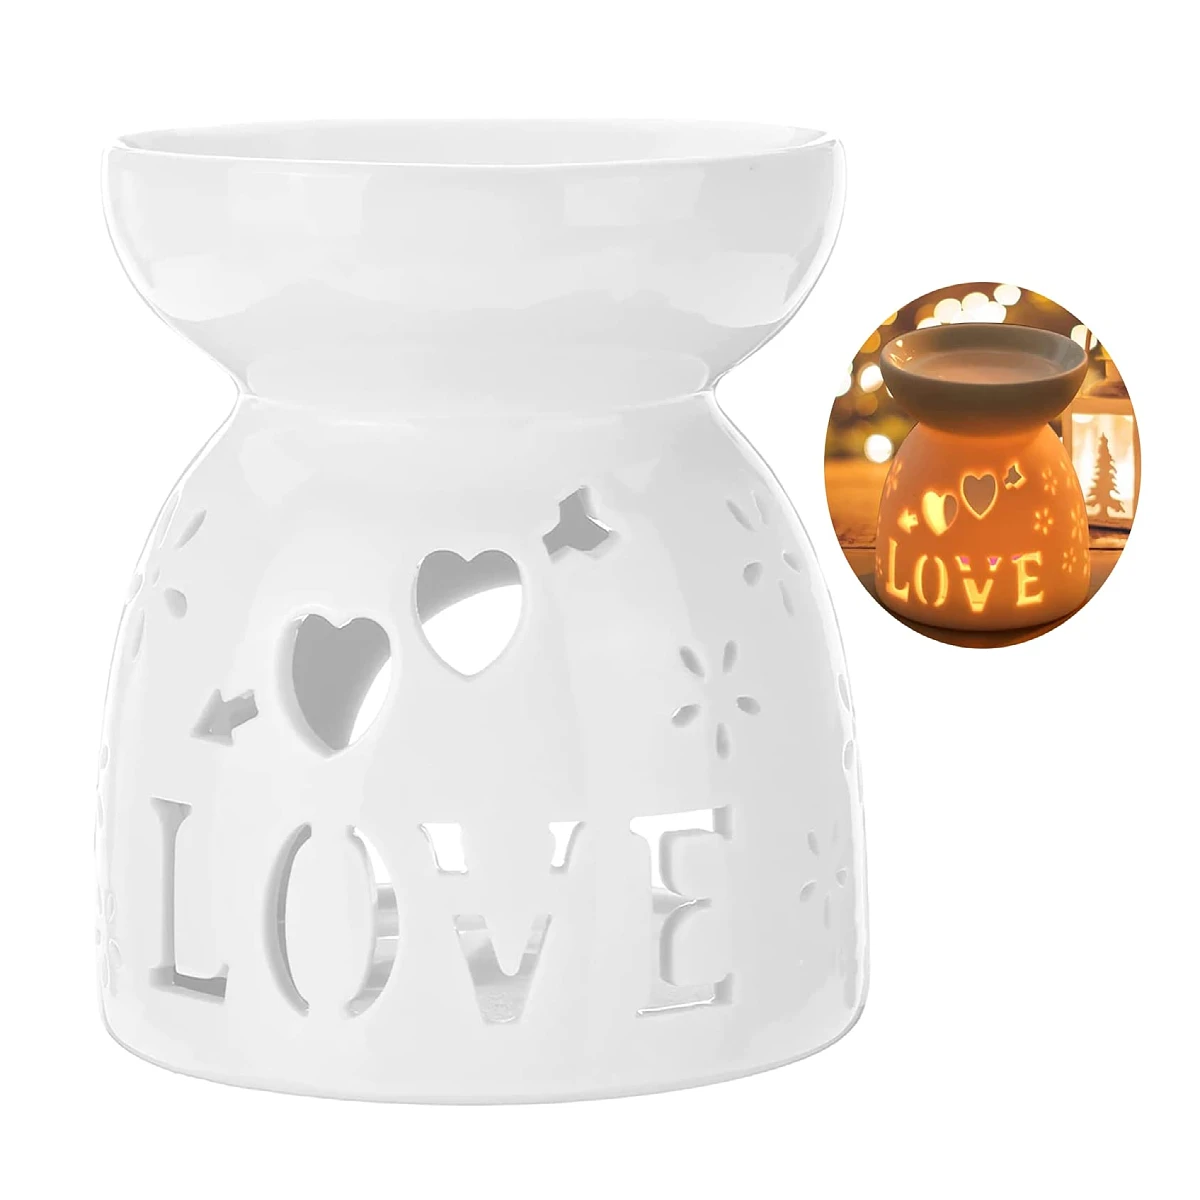 

Wax Melt Essential Oil Burner, Ceramic Aroma Burners Assorted Wax Warmer Aromatherapy Tarts Holder Candle Scented Diffuser